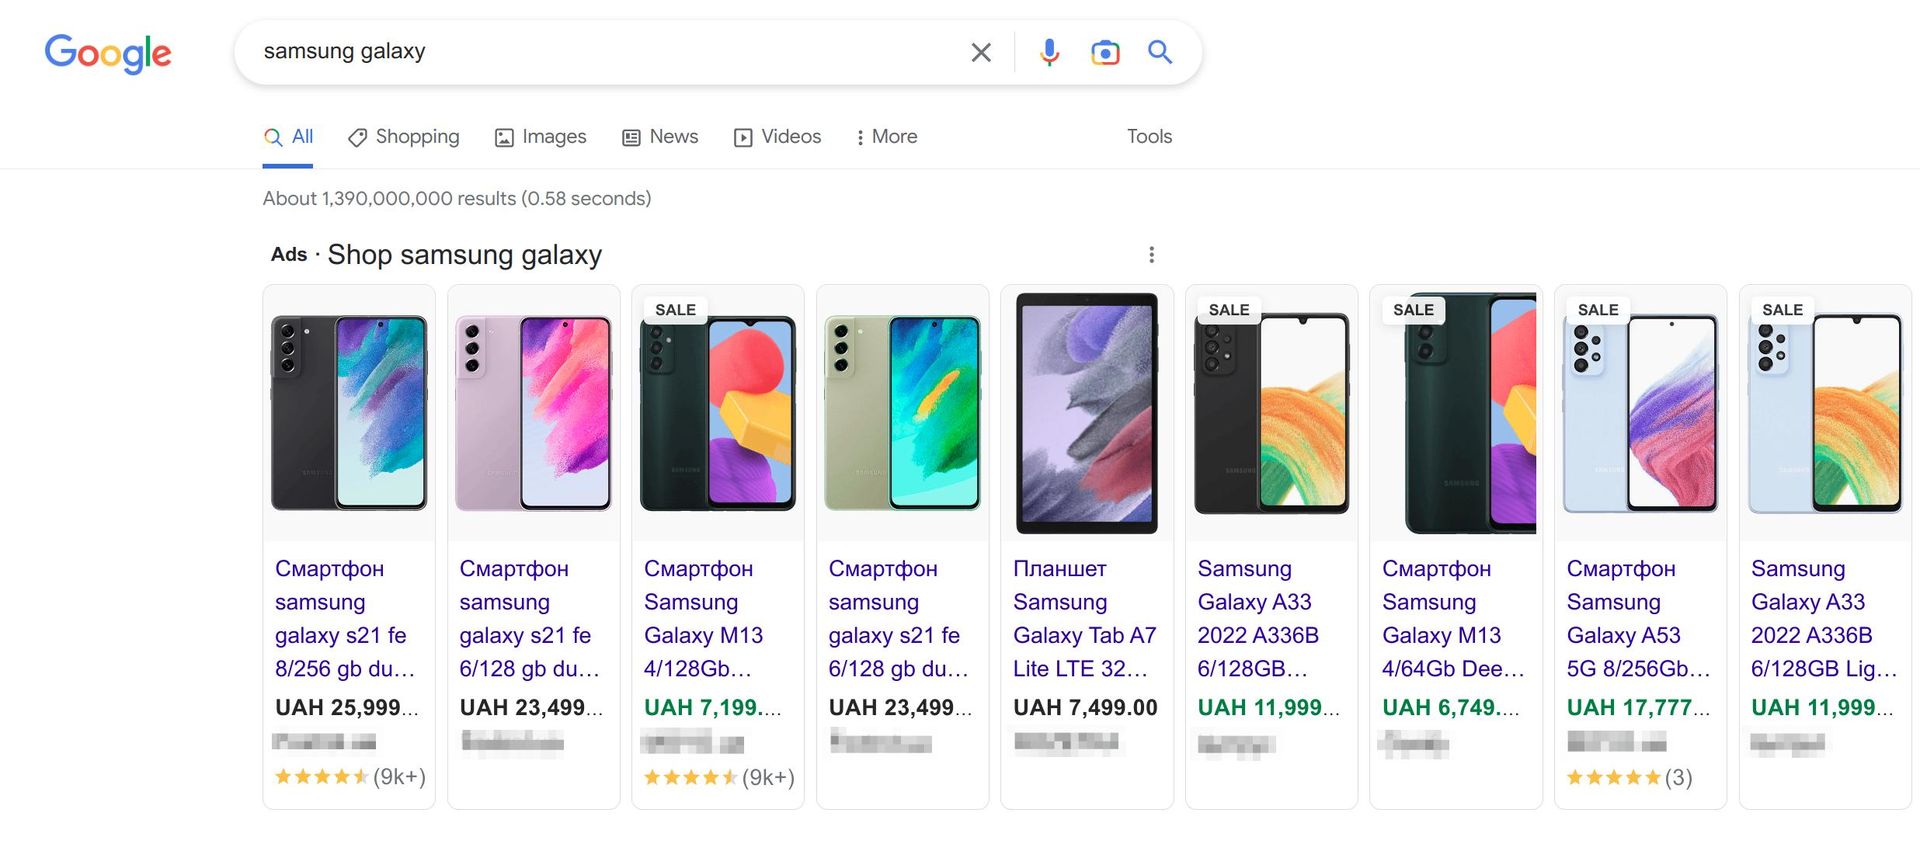 Google Shopping widget in search results